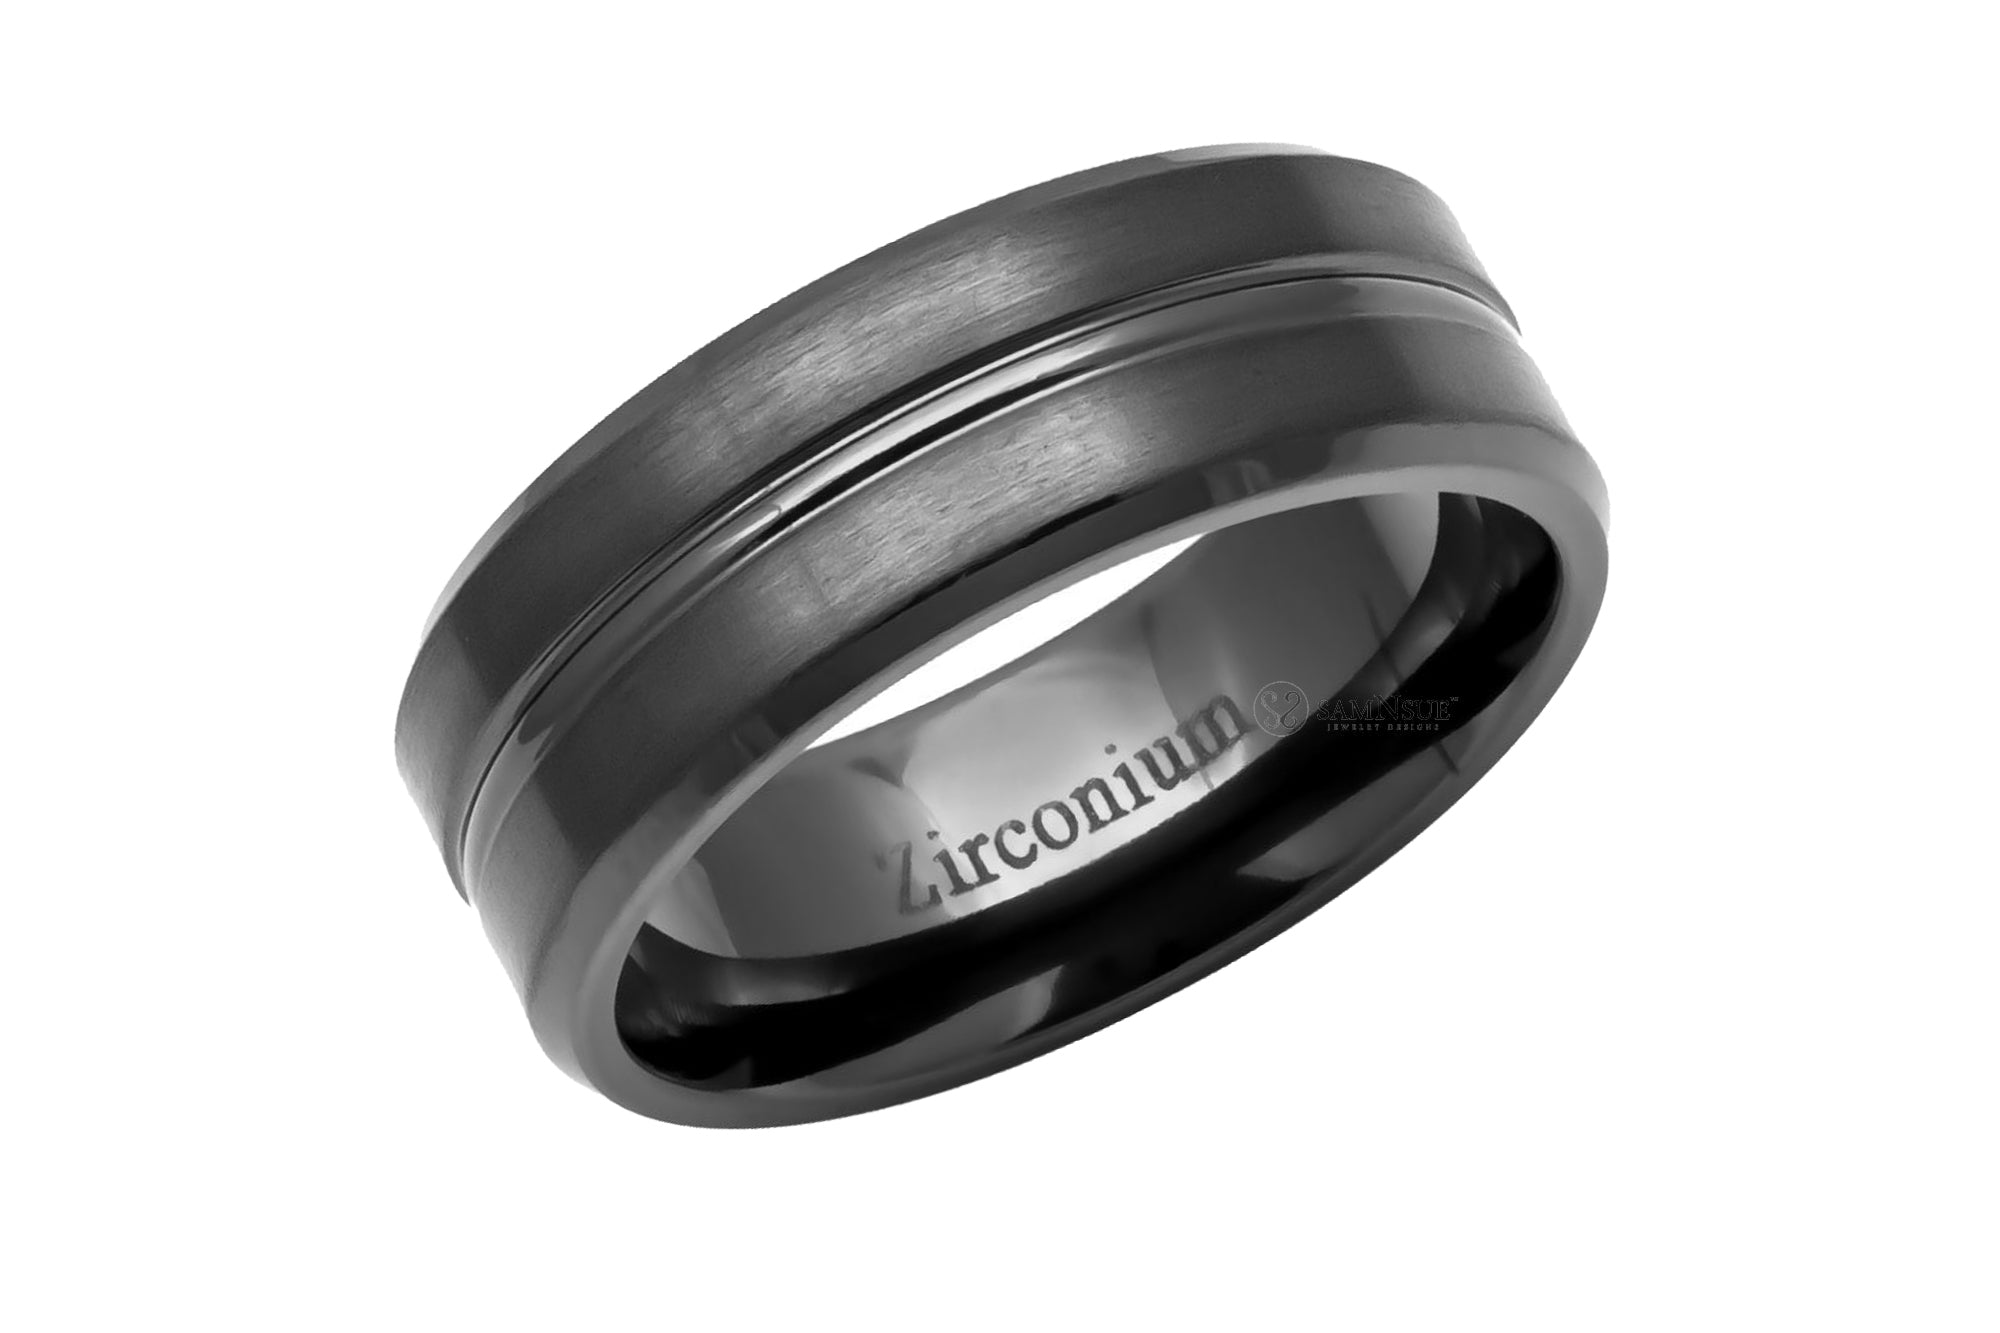 The Beveled Zirconium Band With Center Groove